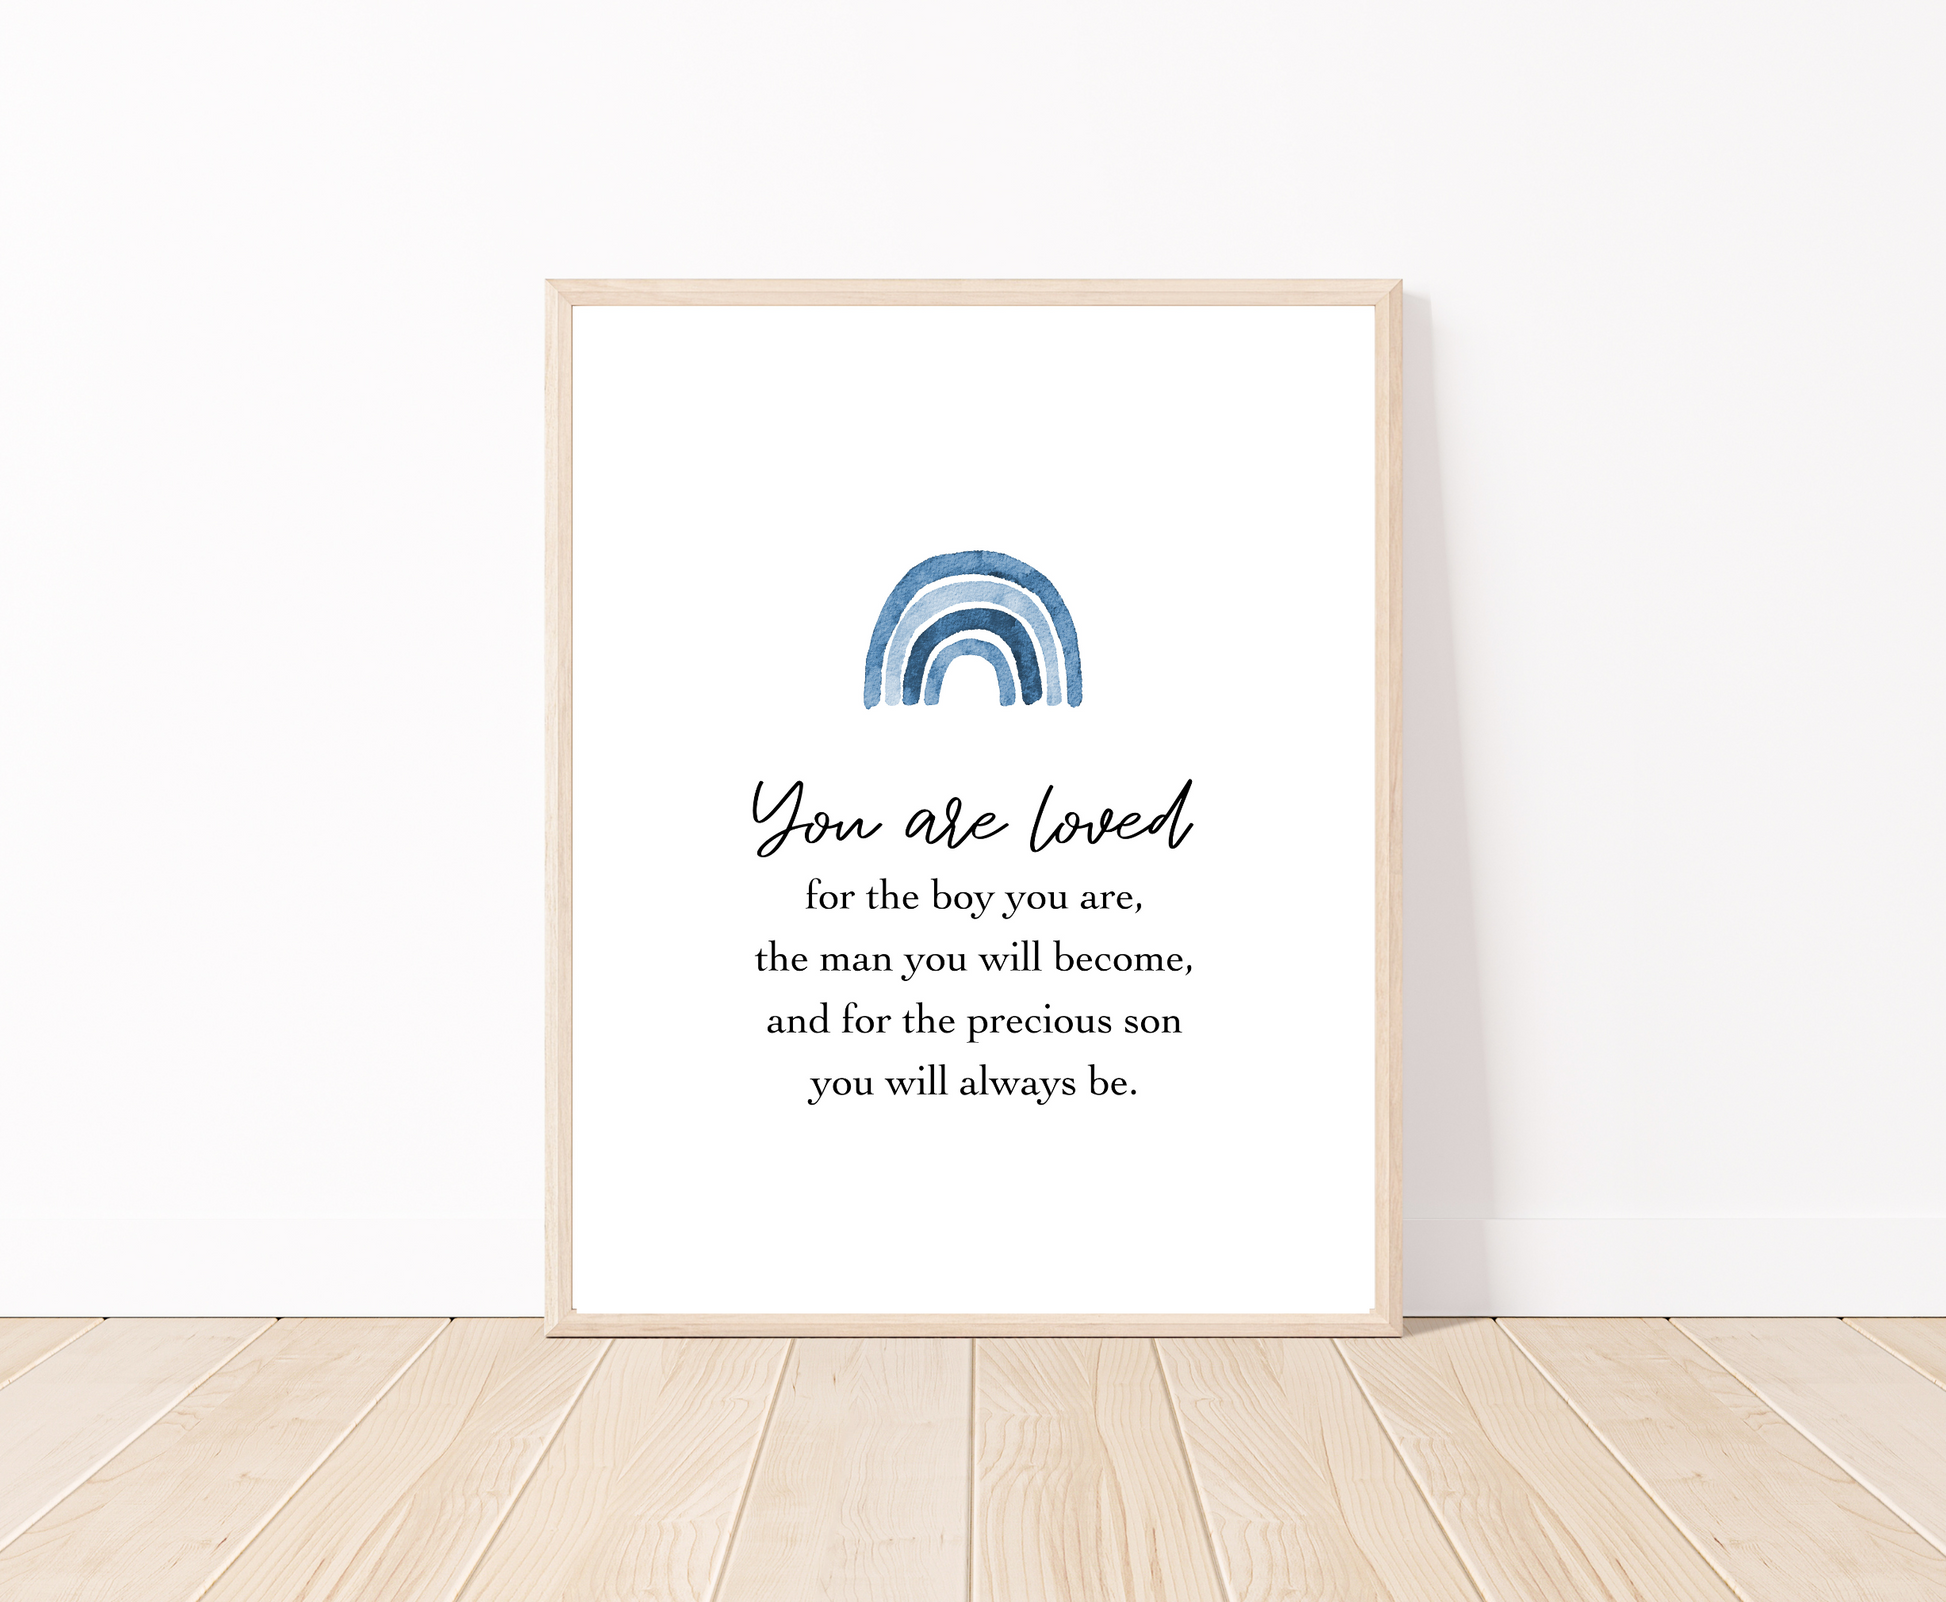 A frame showing a graphic for a little boy’s room that has a blue ombre rainbow design and includes the following “You are loved, for the boy you are, the man you will become, and for the precious son you will always be.”